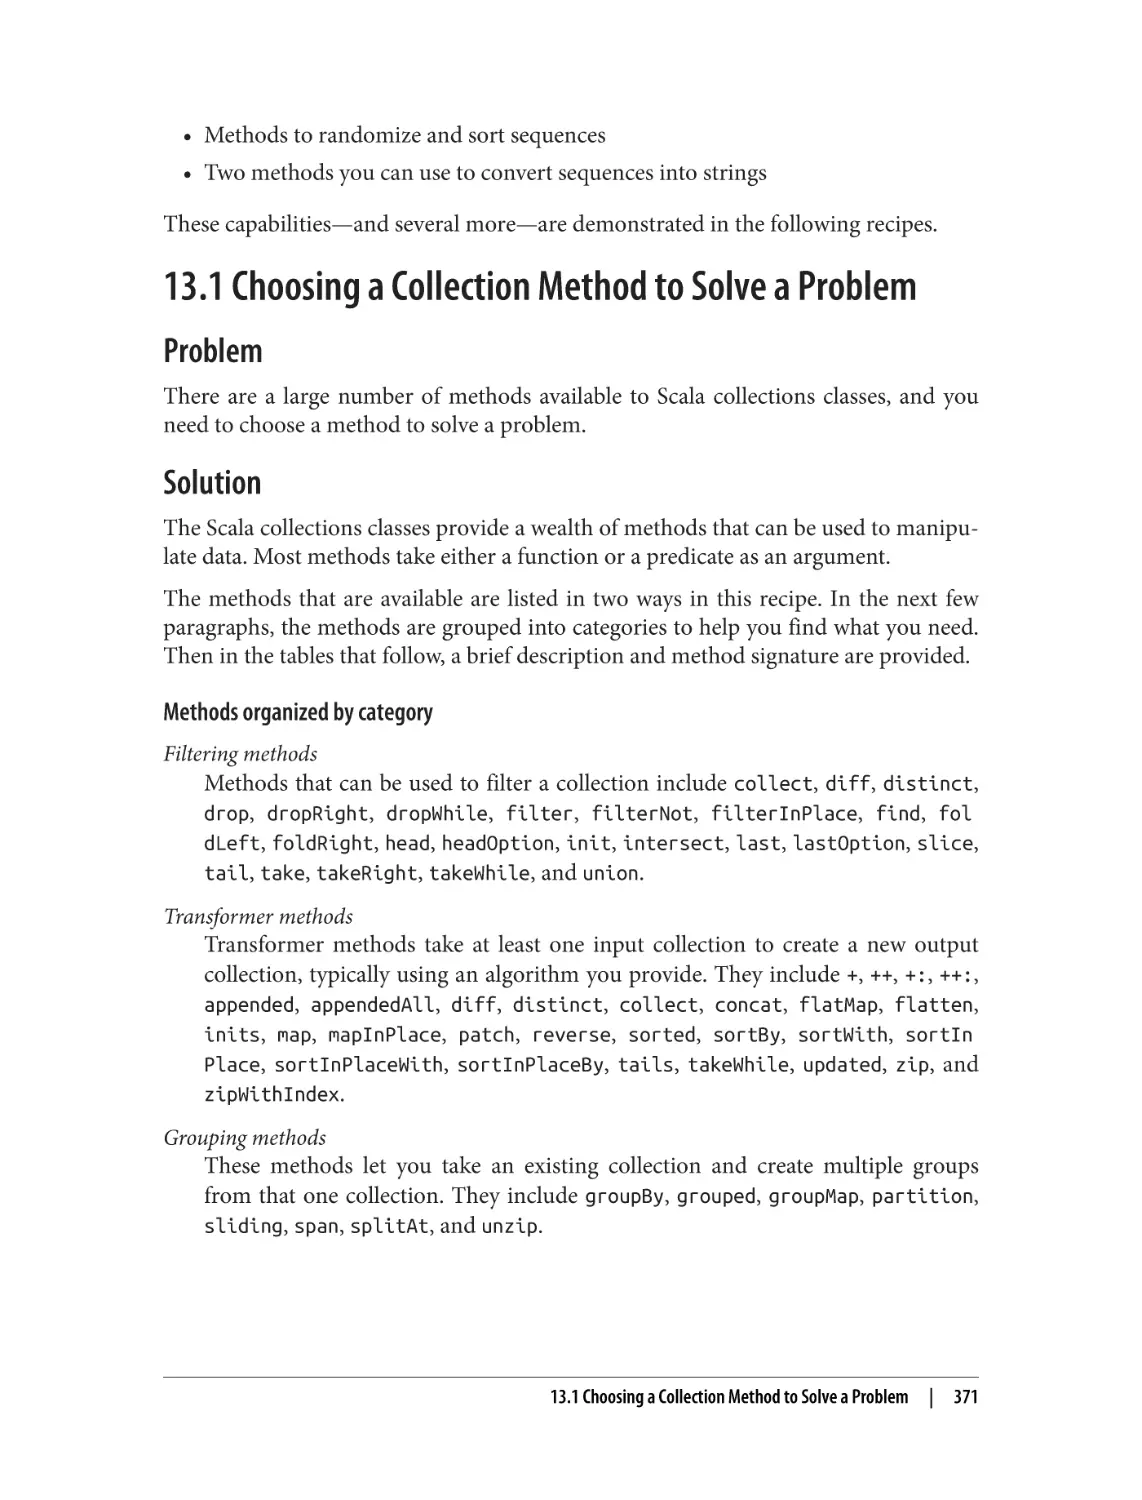 13.1 Choosing a Collection Method to Solve a Problem
Problem
Solution